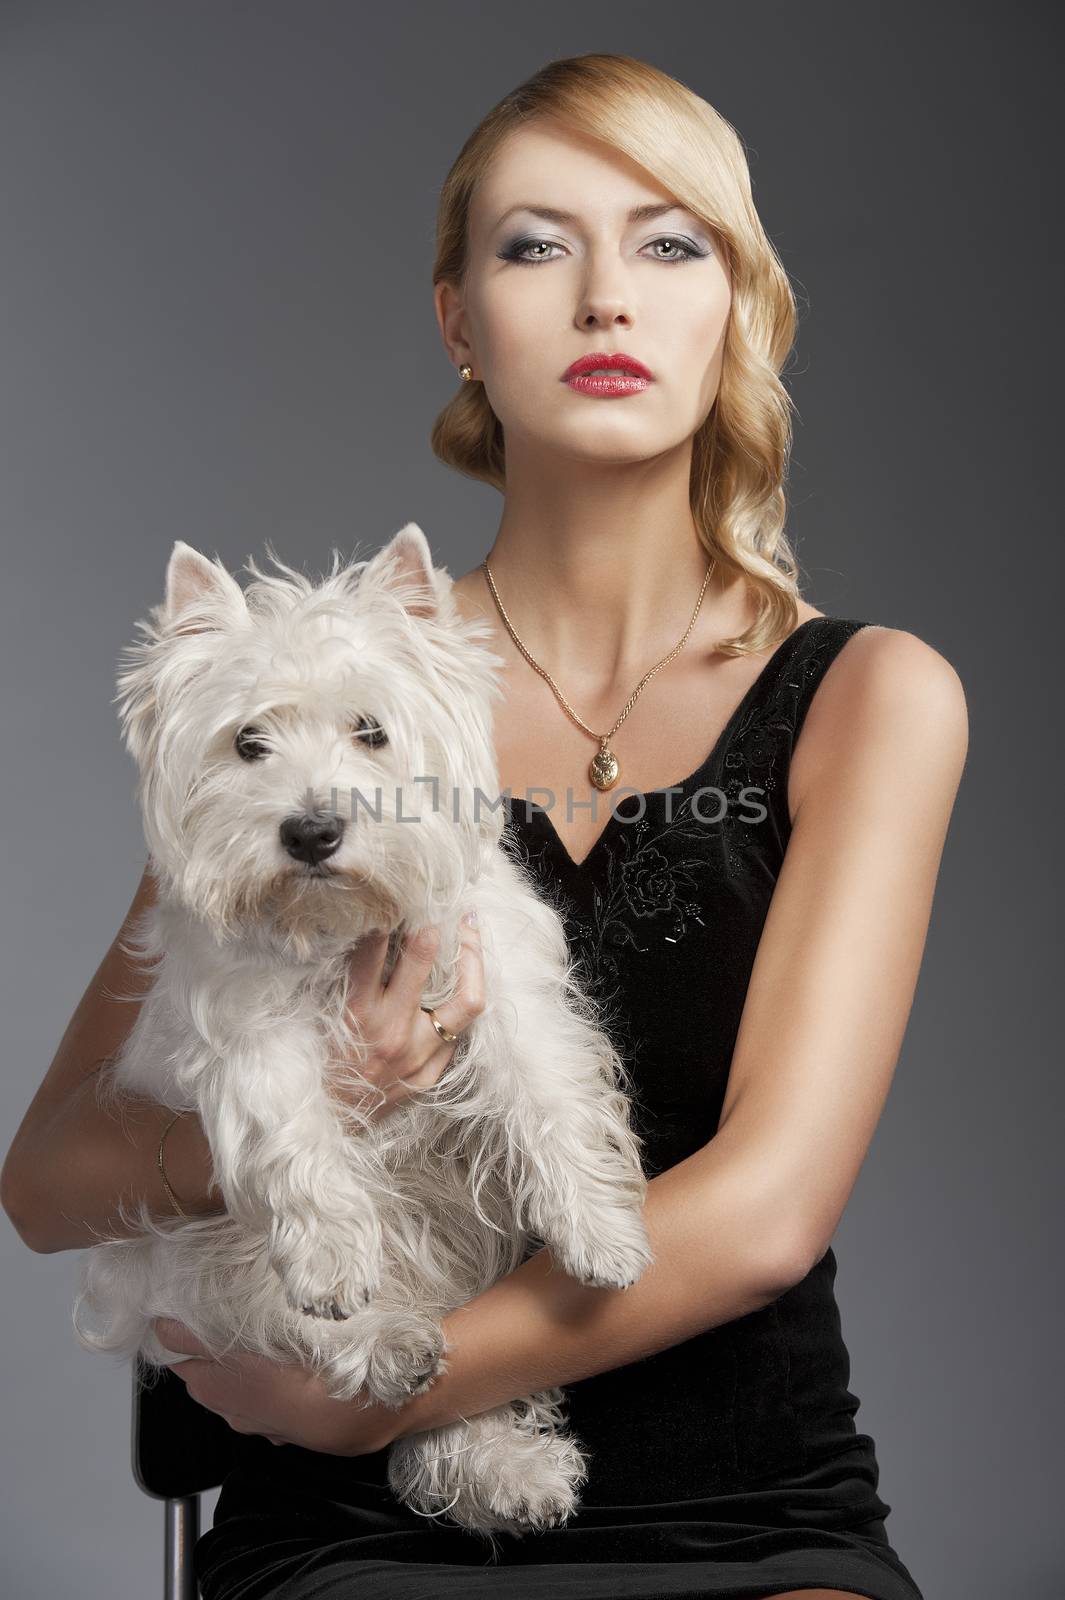 old fashion blond girl, with dog she looks in to the lens by fotoCD